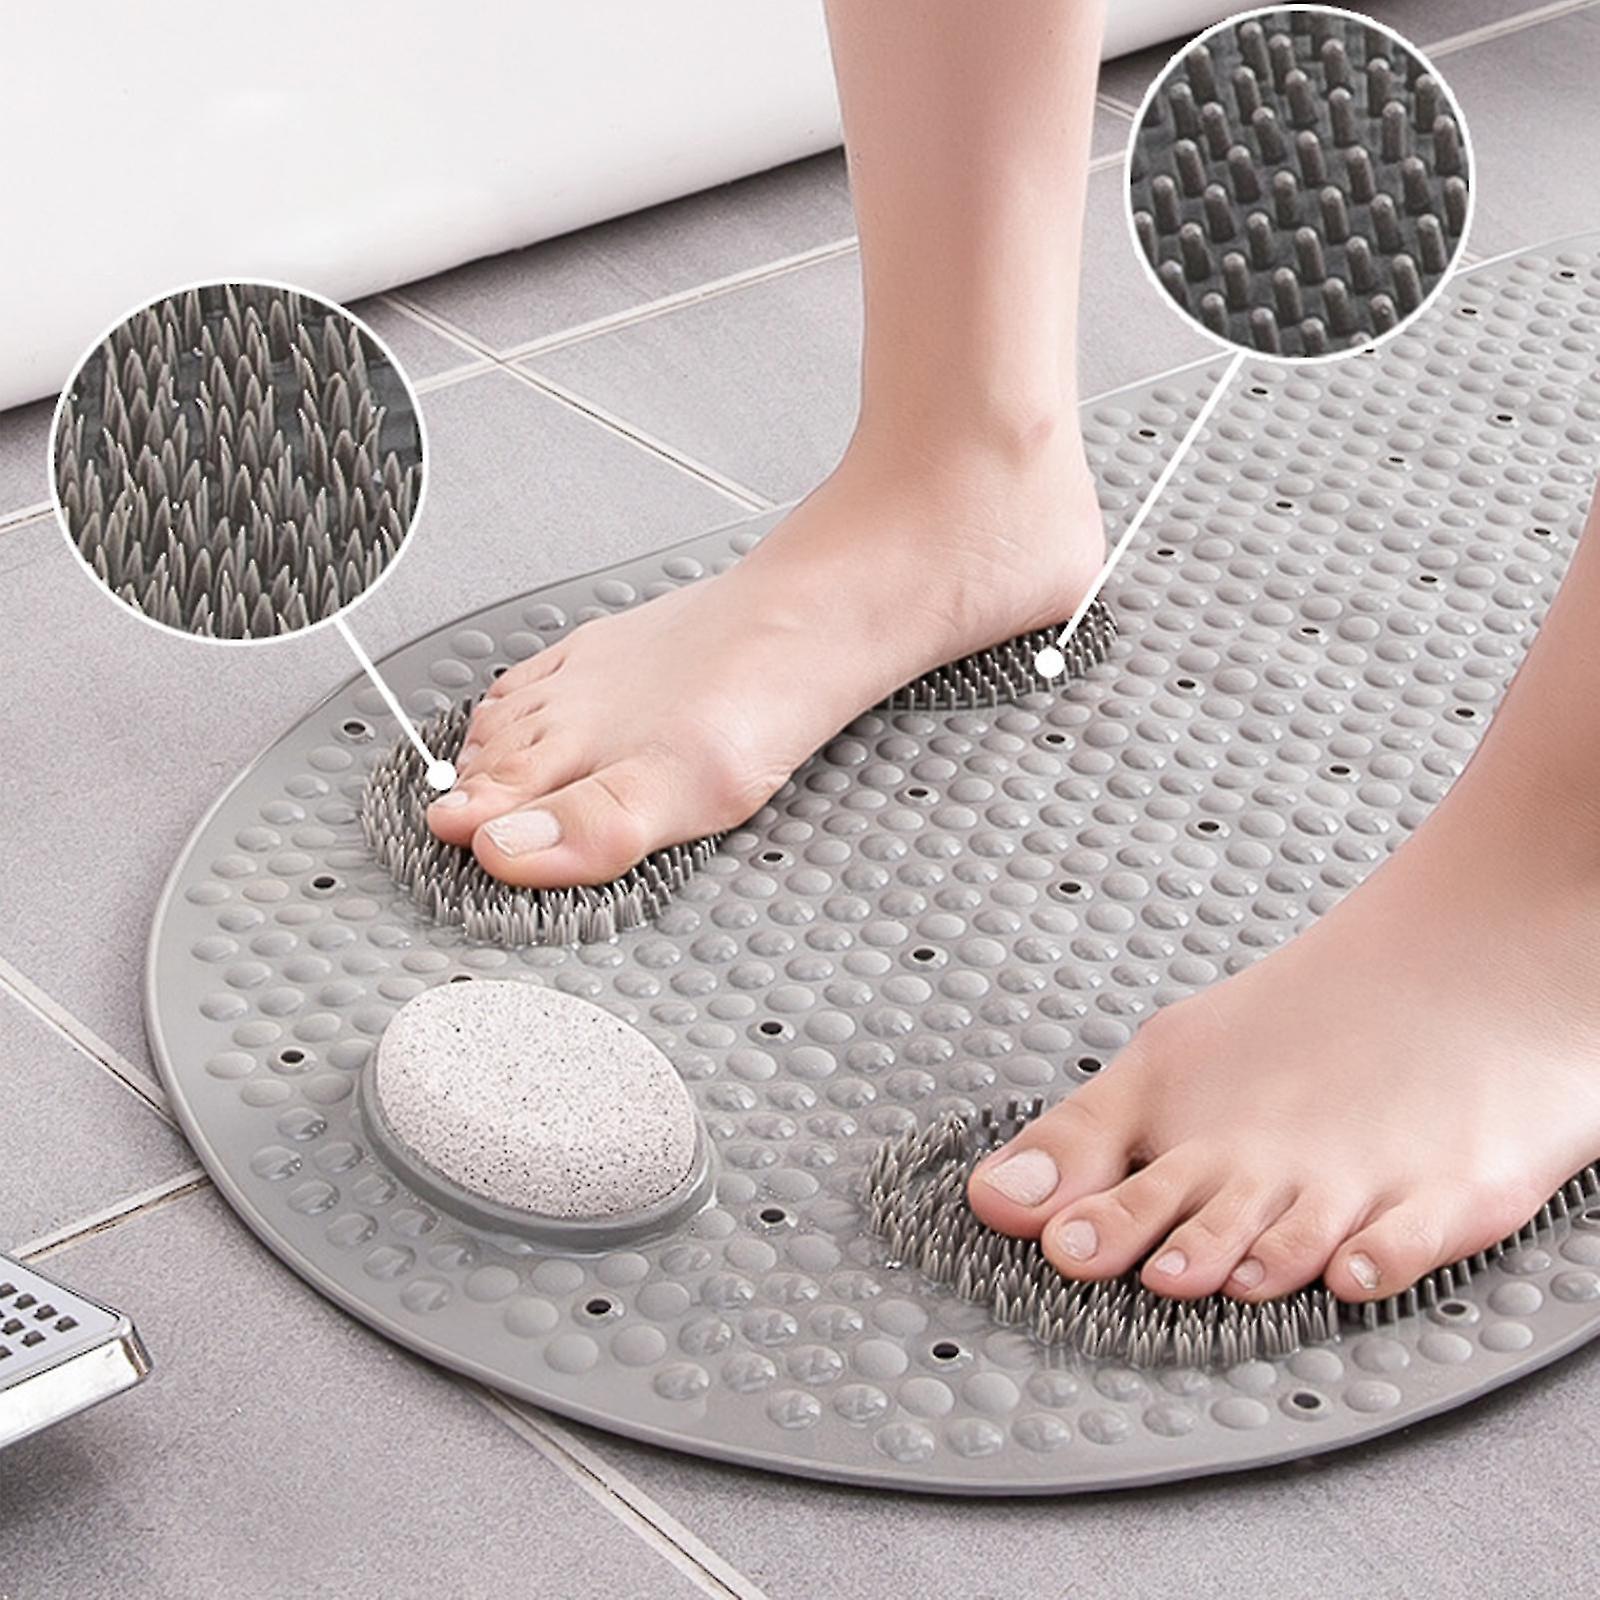 3 in 1 Pumice Stone Callus Remover Bath Mat Foot Massager Tool with Anti-Slip Suction Cup and Drain Holes